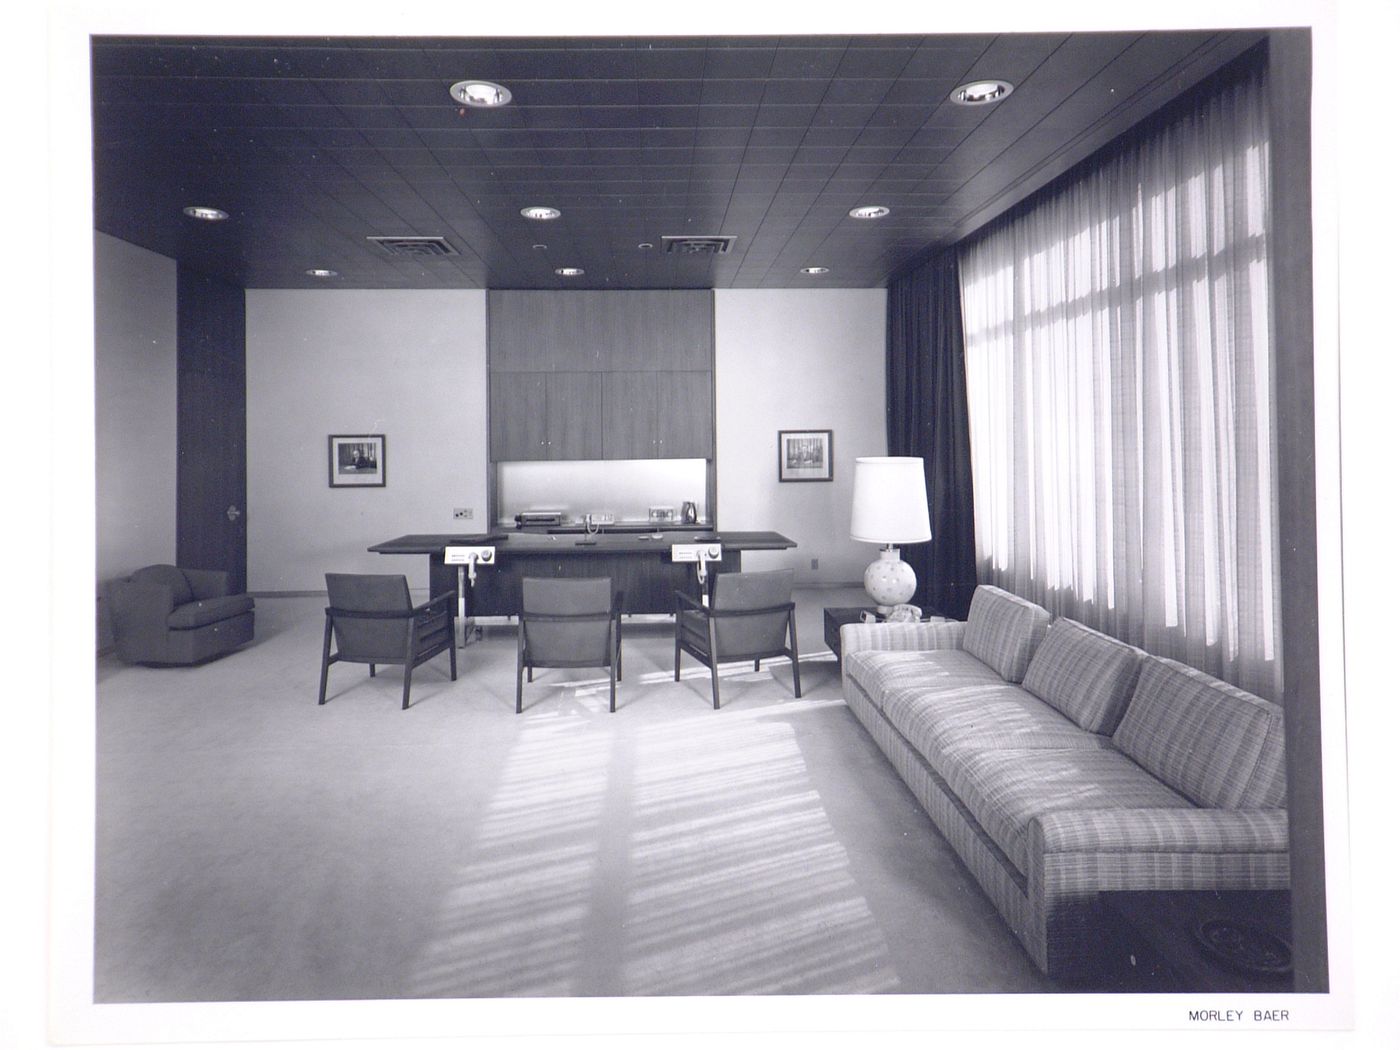 Interior view of an office with a sitting area, Kaiser Center, Oakland, California, United States